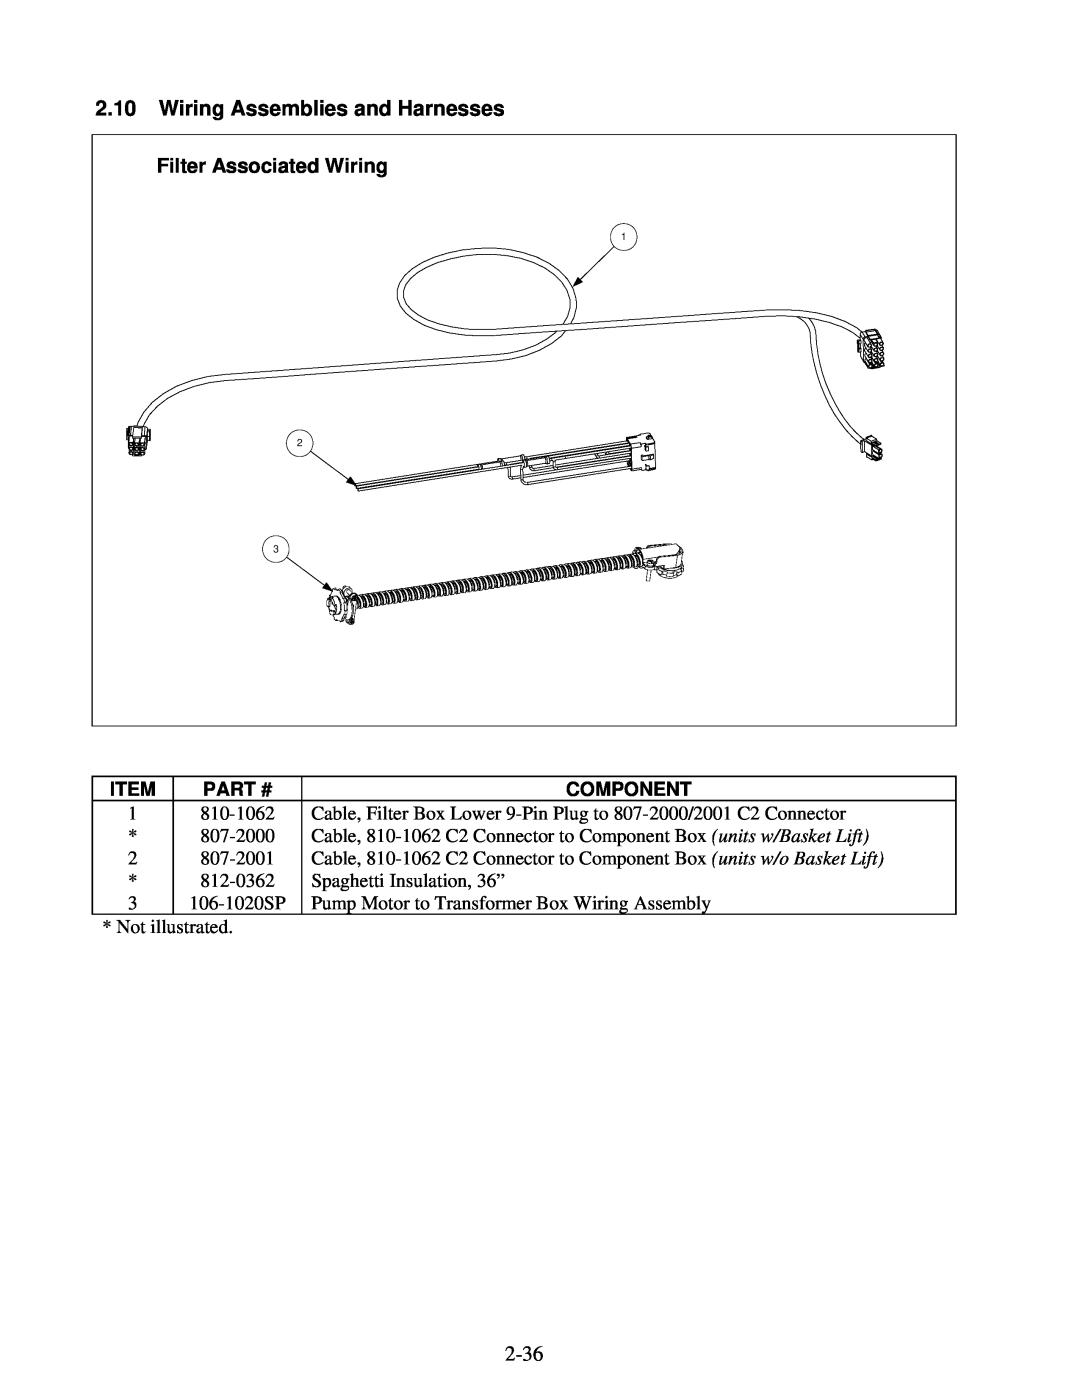 Frymaster H50 manual 2.10Wiring Assemblies and Harnesses, Filter Associated Wiring, Part #, Component 